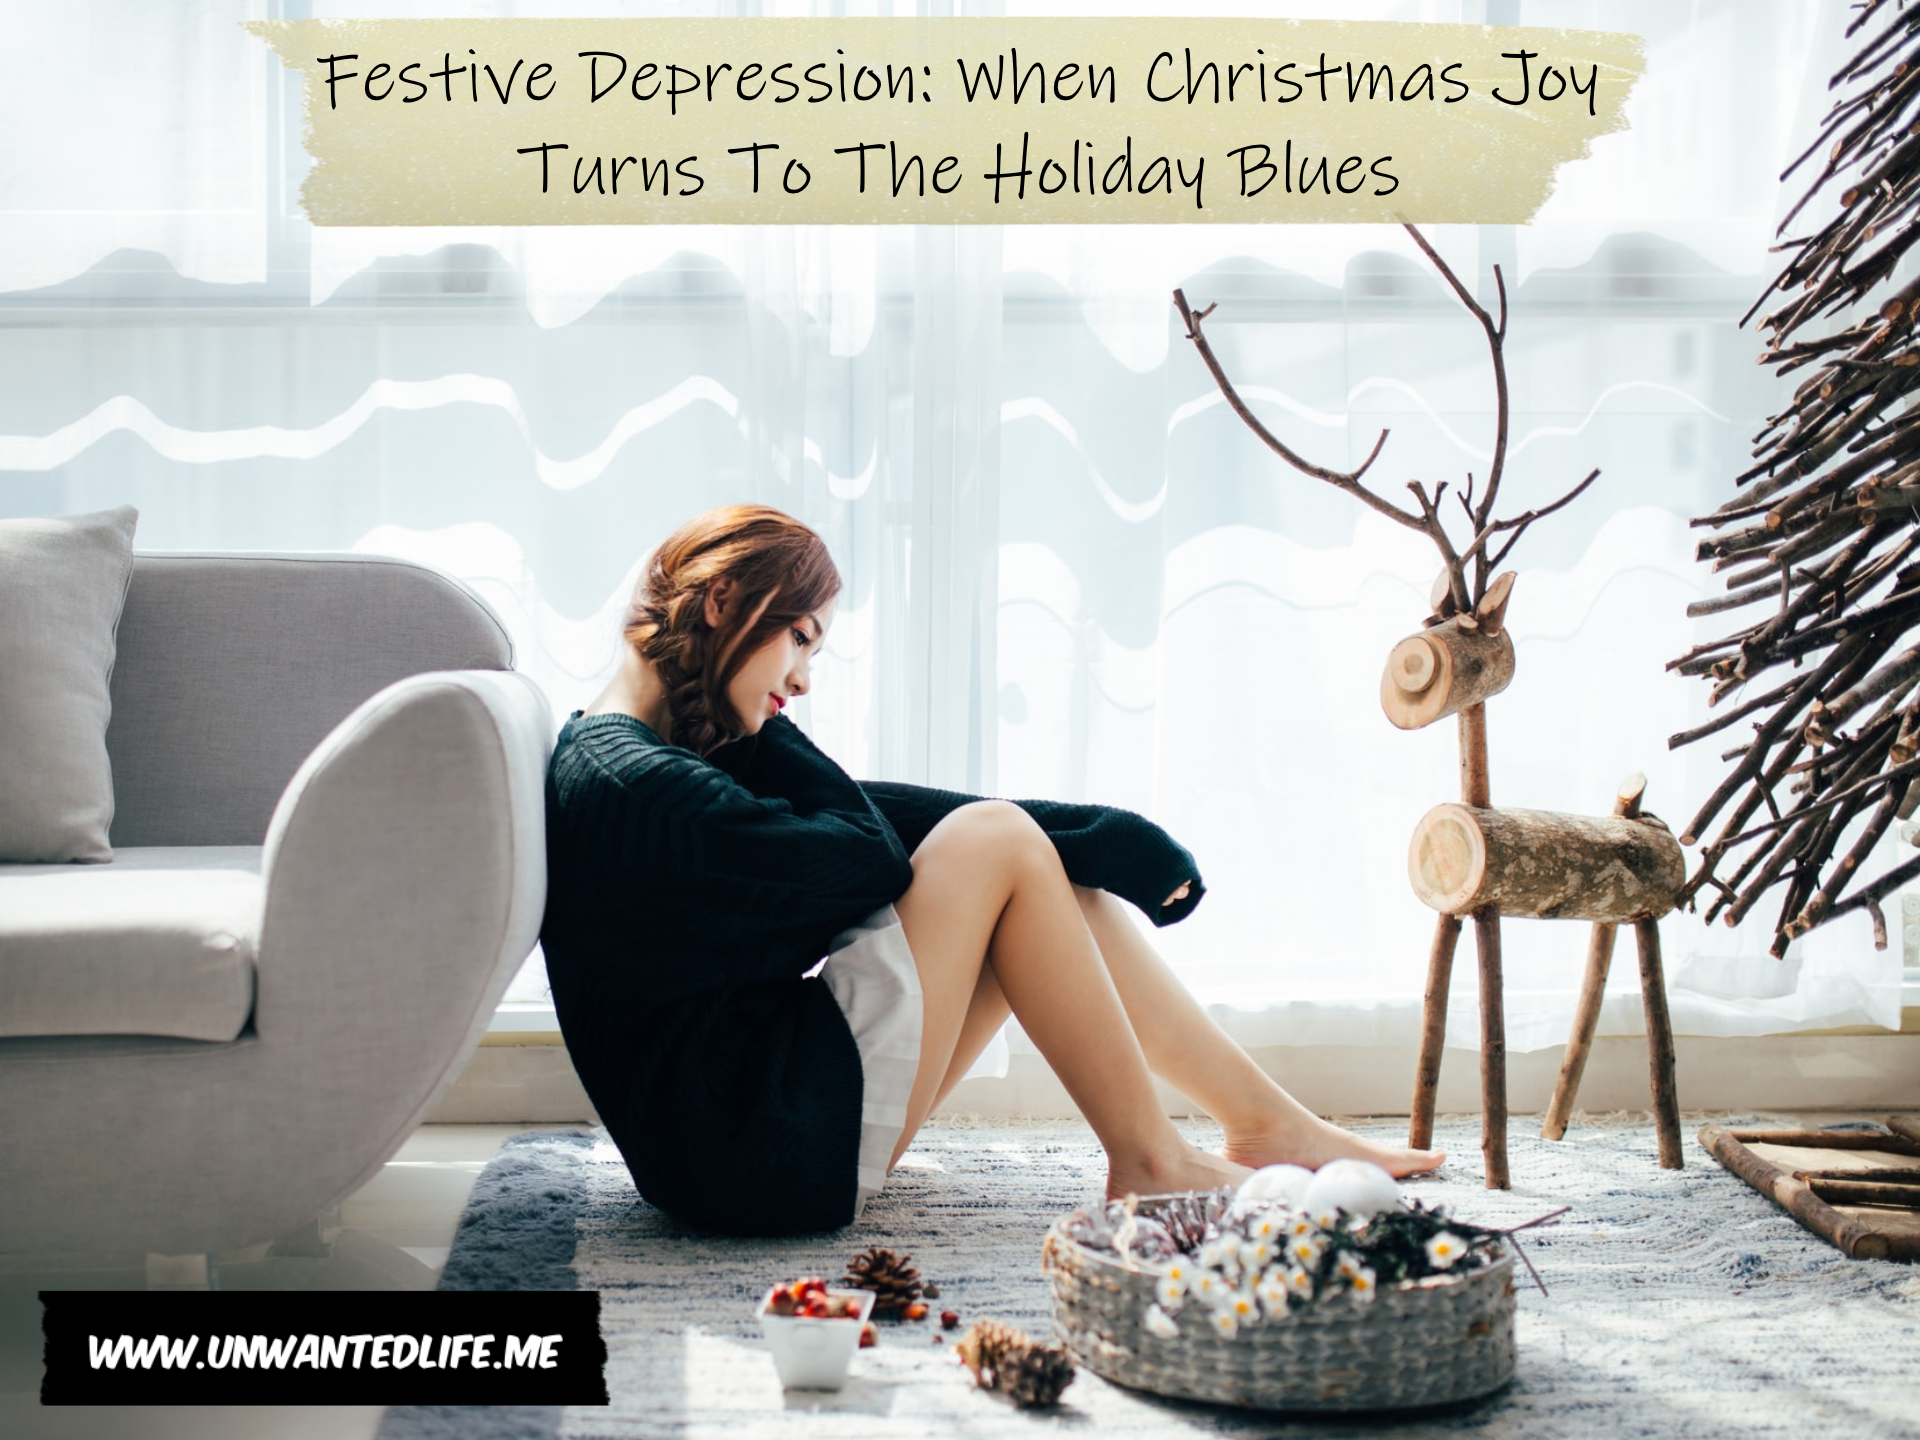 Photo of a woman of east Asian heritage sitting on the floor and resting against a sofa looking sad, with Christmas decorations in front of her to represent the topic of the article - Festive Depression: When Christmas Joy Turns To The Holiday Blues